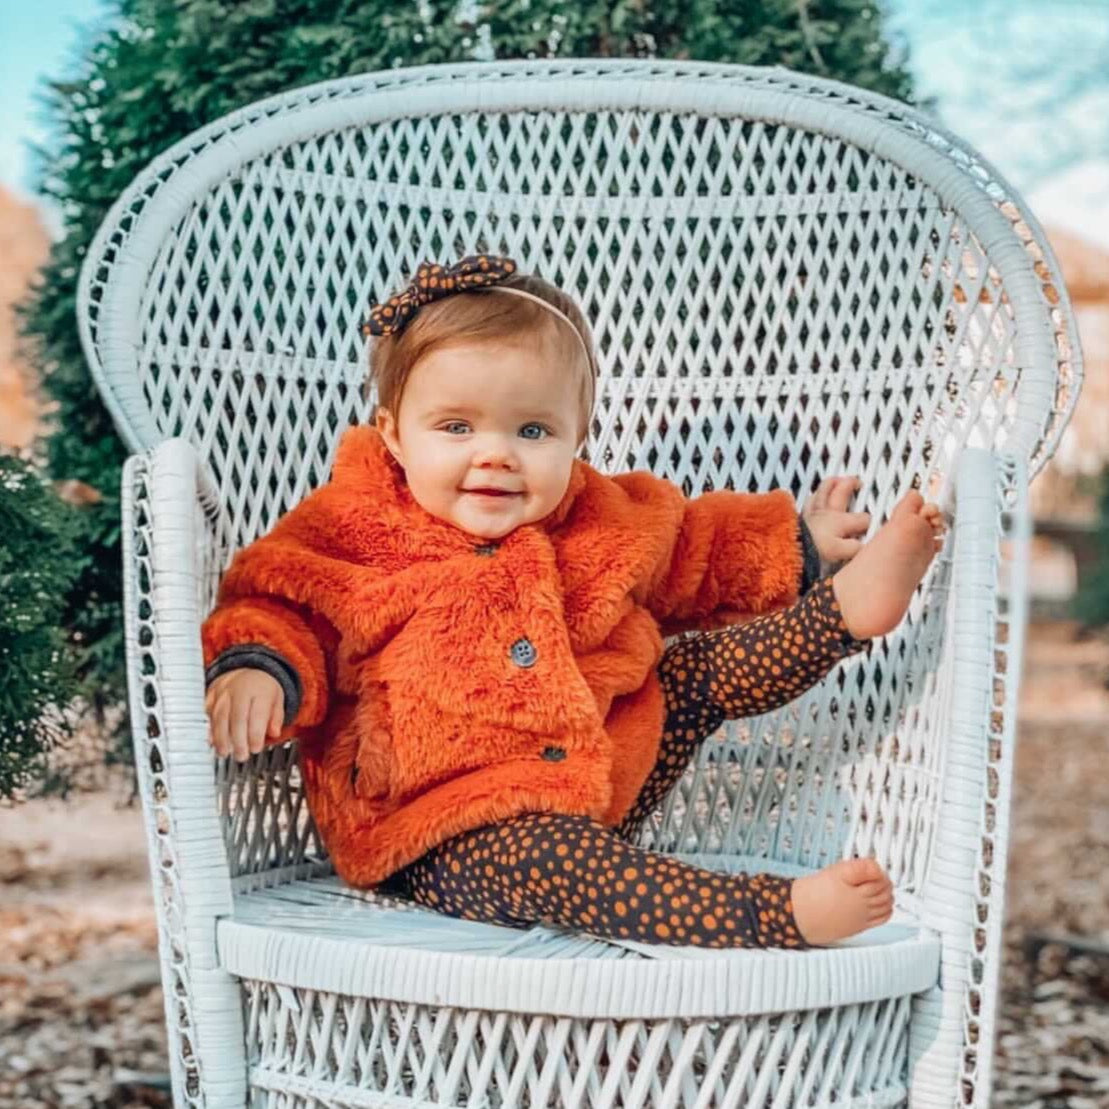 Baby sitting on a wicker chair wearing Black Abstract Micro Dot Leggings and/or Headbands